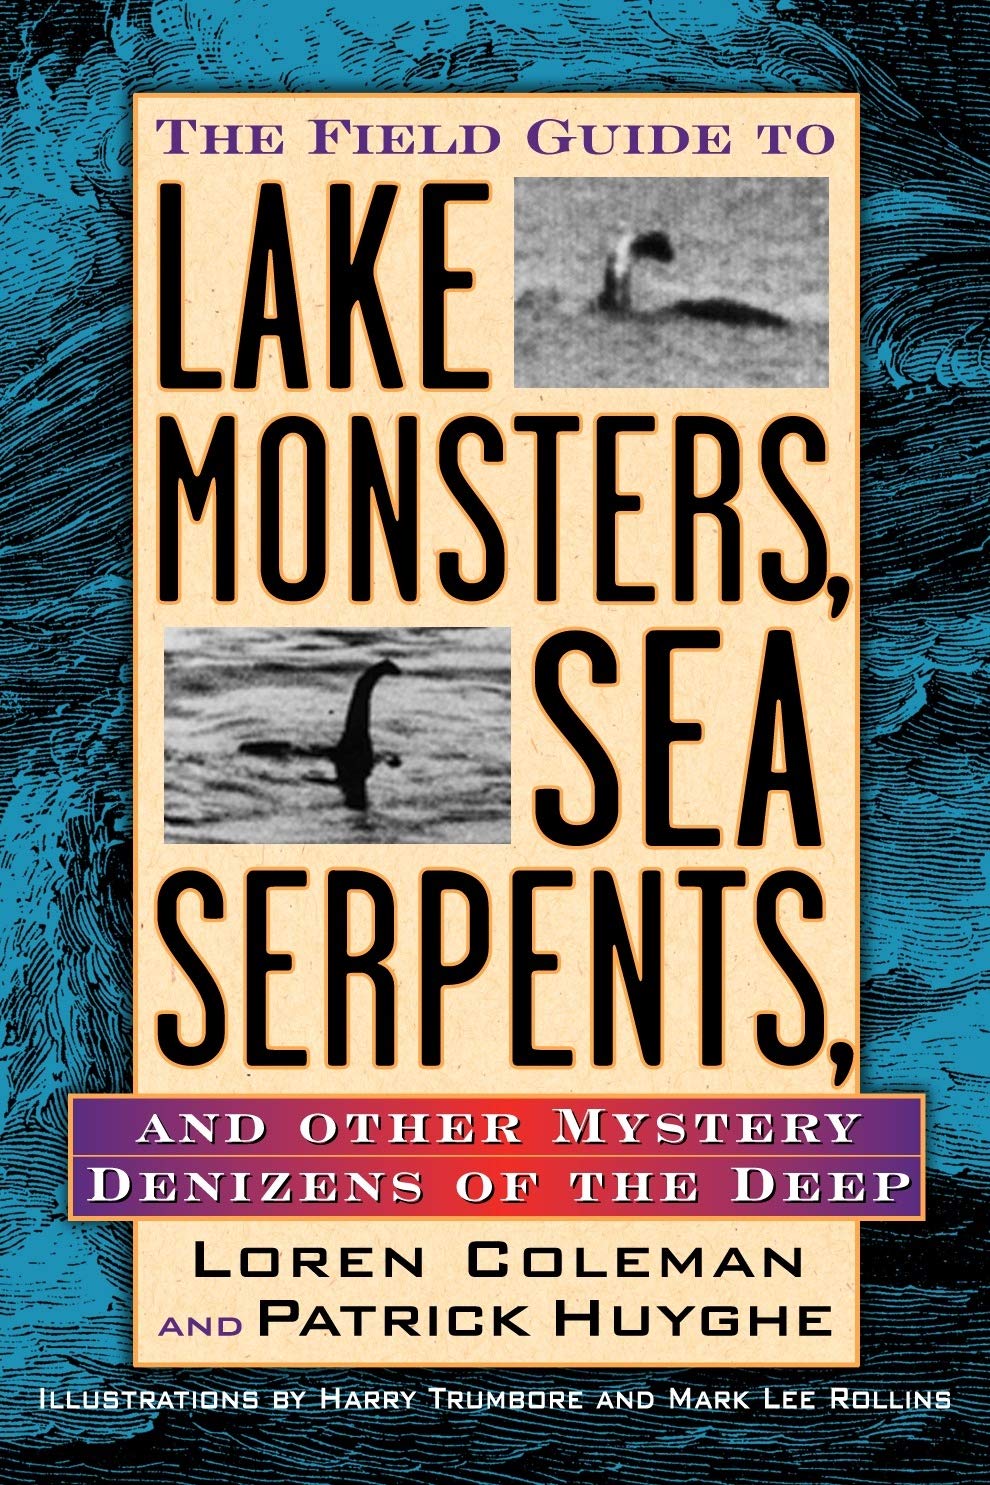 Field Guide to Lake Monsters, Sea Serpents, and Other Mystery Denizensof the Deep